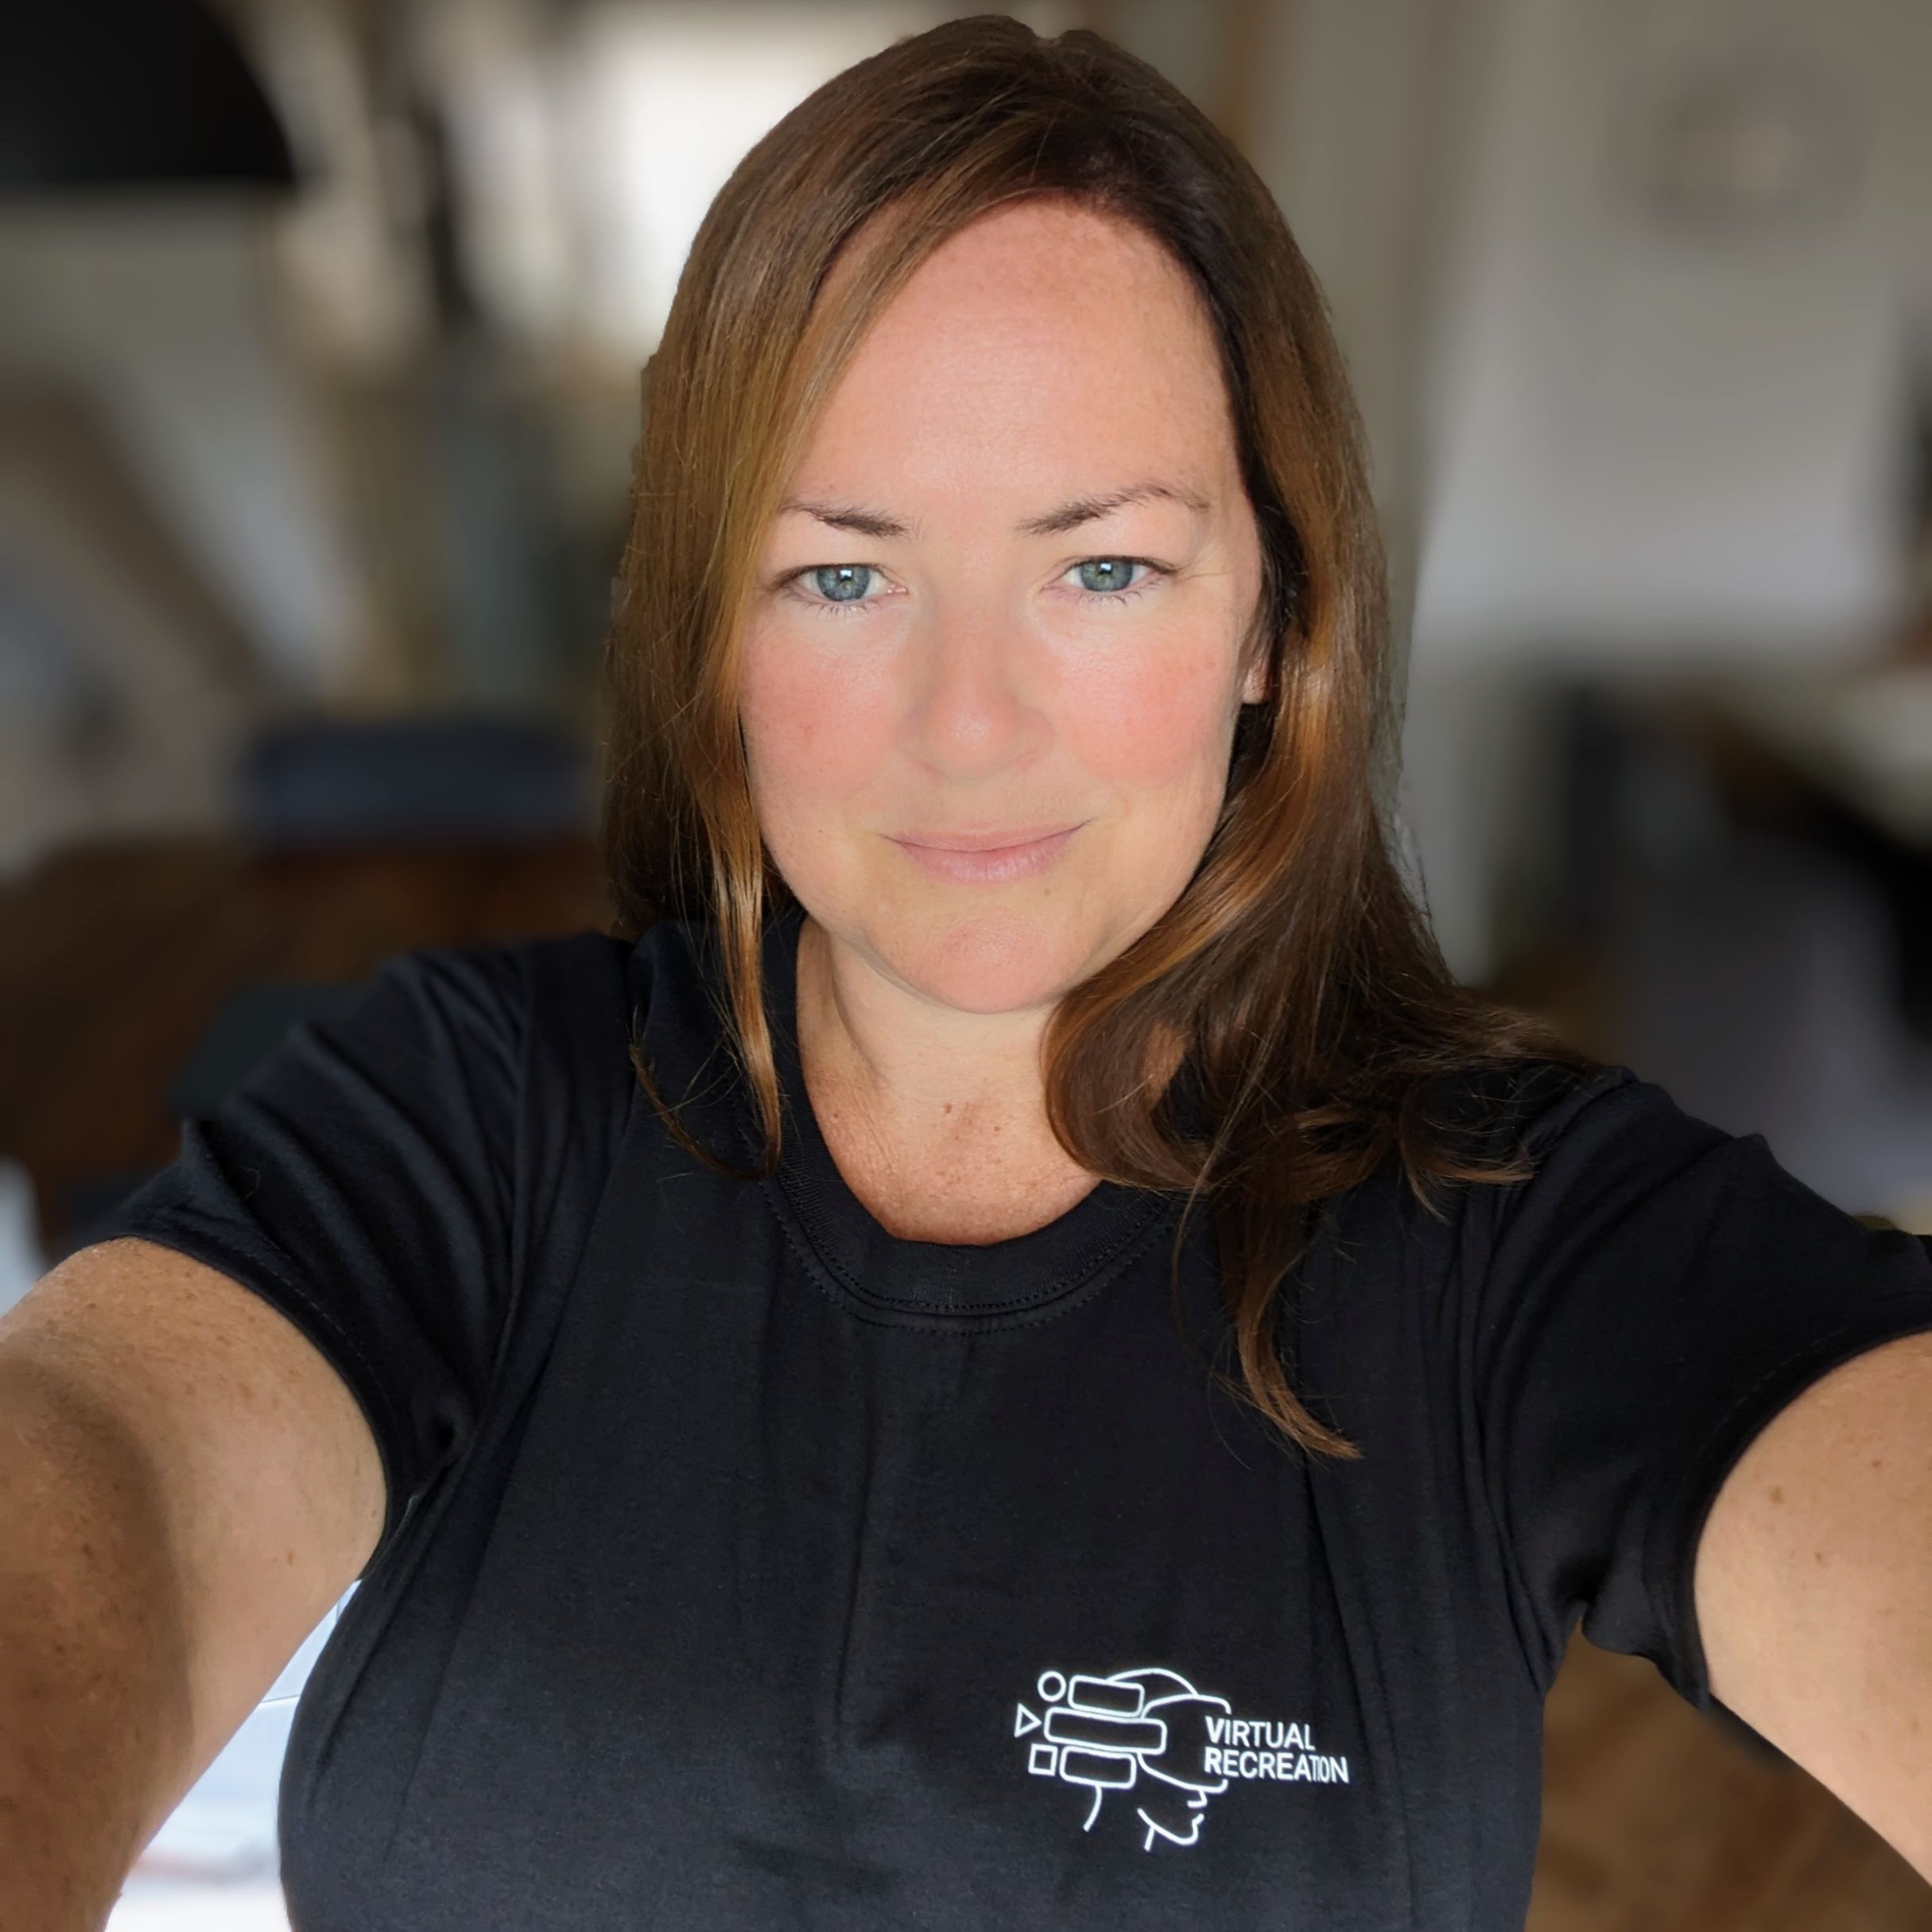 Portrait photo of Jackie. She is wearing a blavk t-shirt and has brown hair